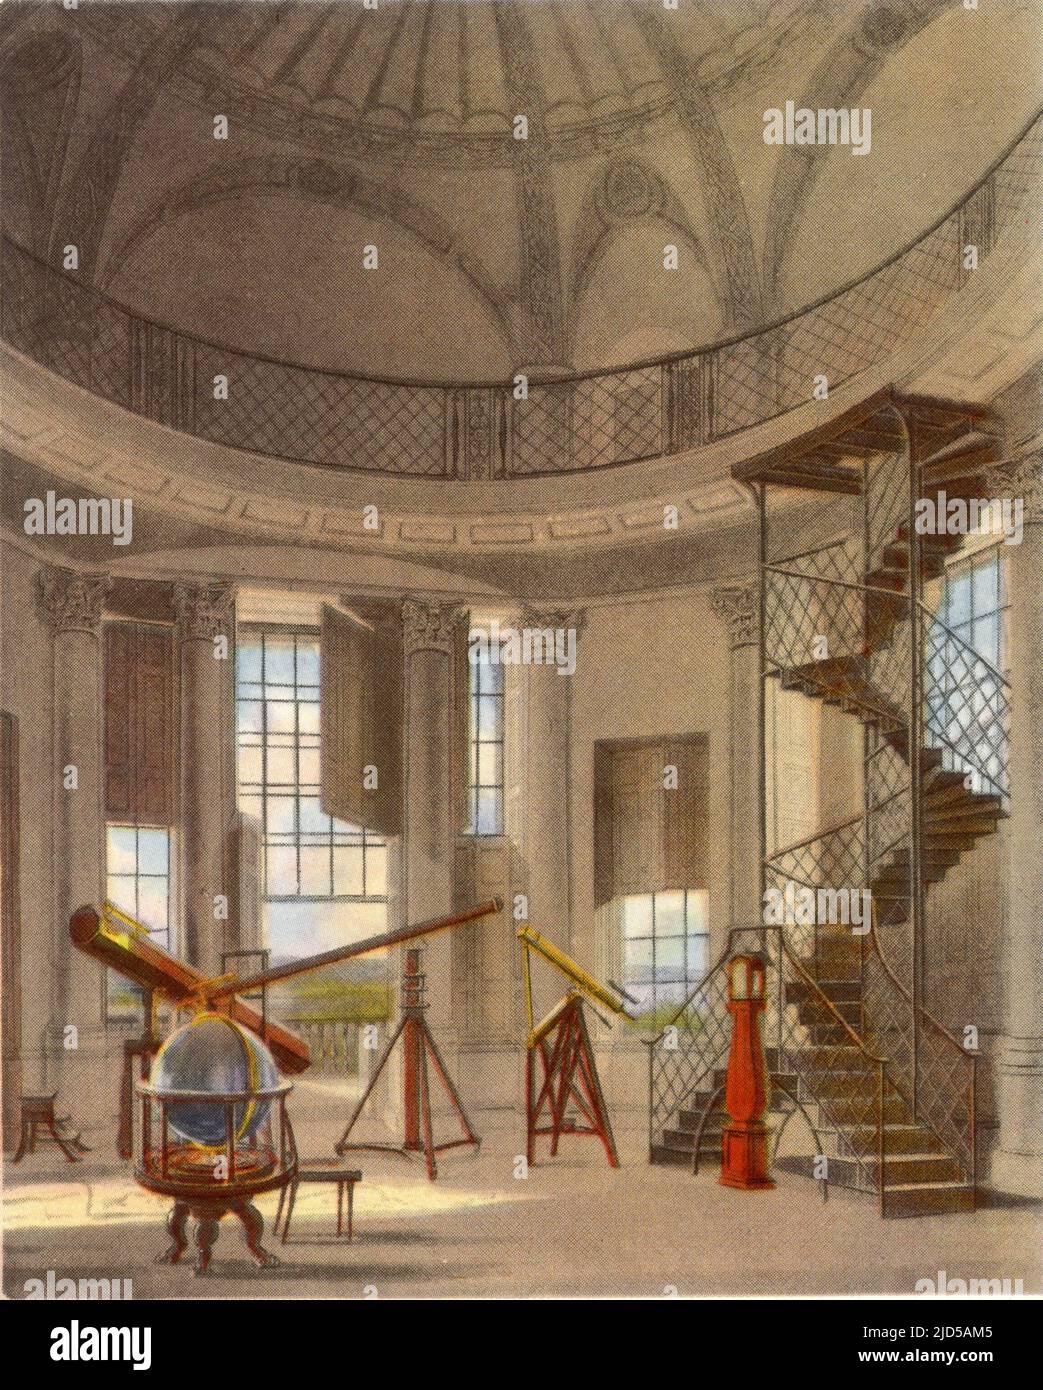 The Radcliffe Observatory, 1814. After Frederick Mackenzie (c1788-1854). Radcliffe Observatory was the astronomical observatory of the University of Oxford from 1773 until 1934. Today, the observatory forms a part of Green Templeton College of the University of Oxford. A print from 'A History of the University of Oxford, its Colleges, Halls, and Public Buildings', published by Rudolph Ackermann, 1814. Ilustrated by Augustus Pugin, F. Mackenzie and others. Stock Photo